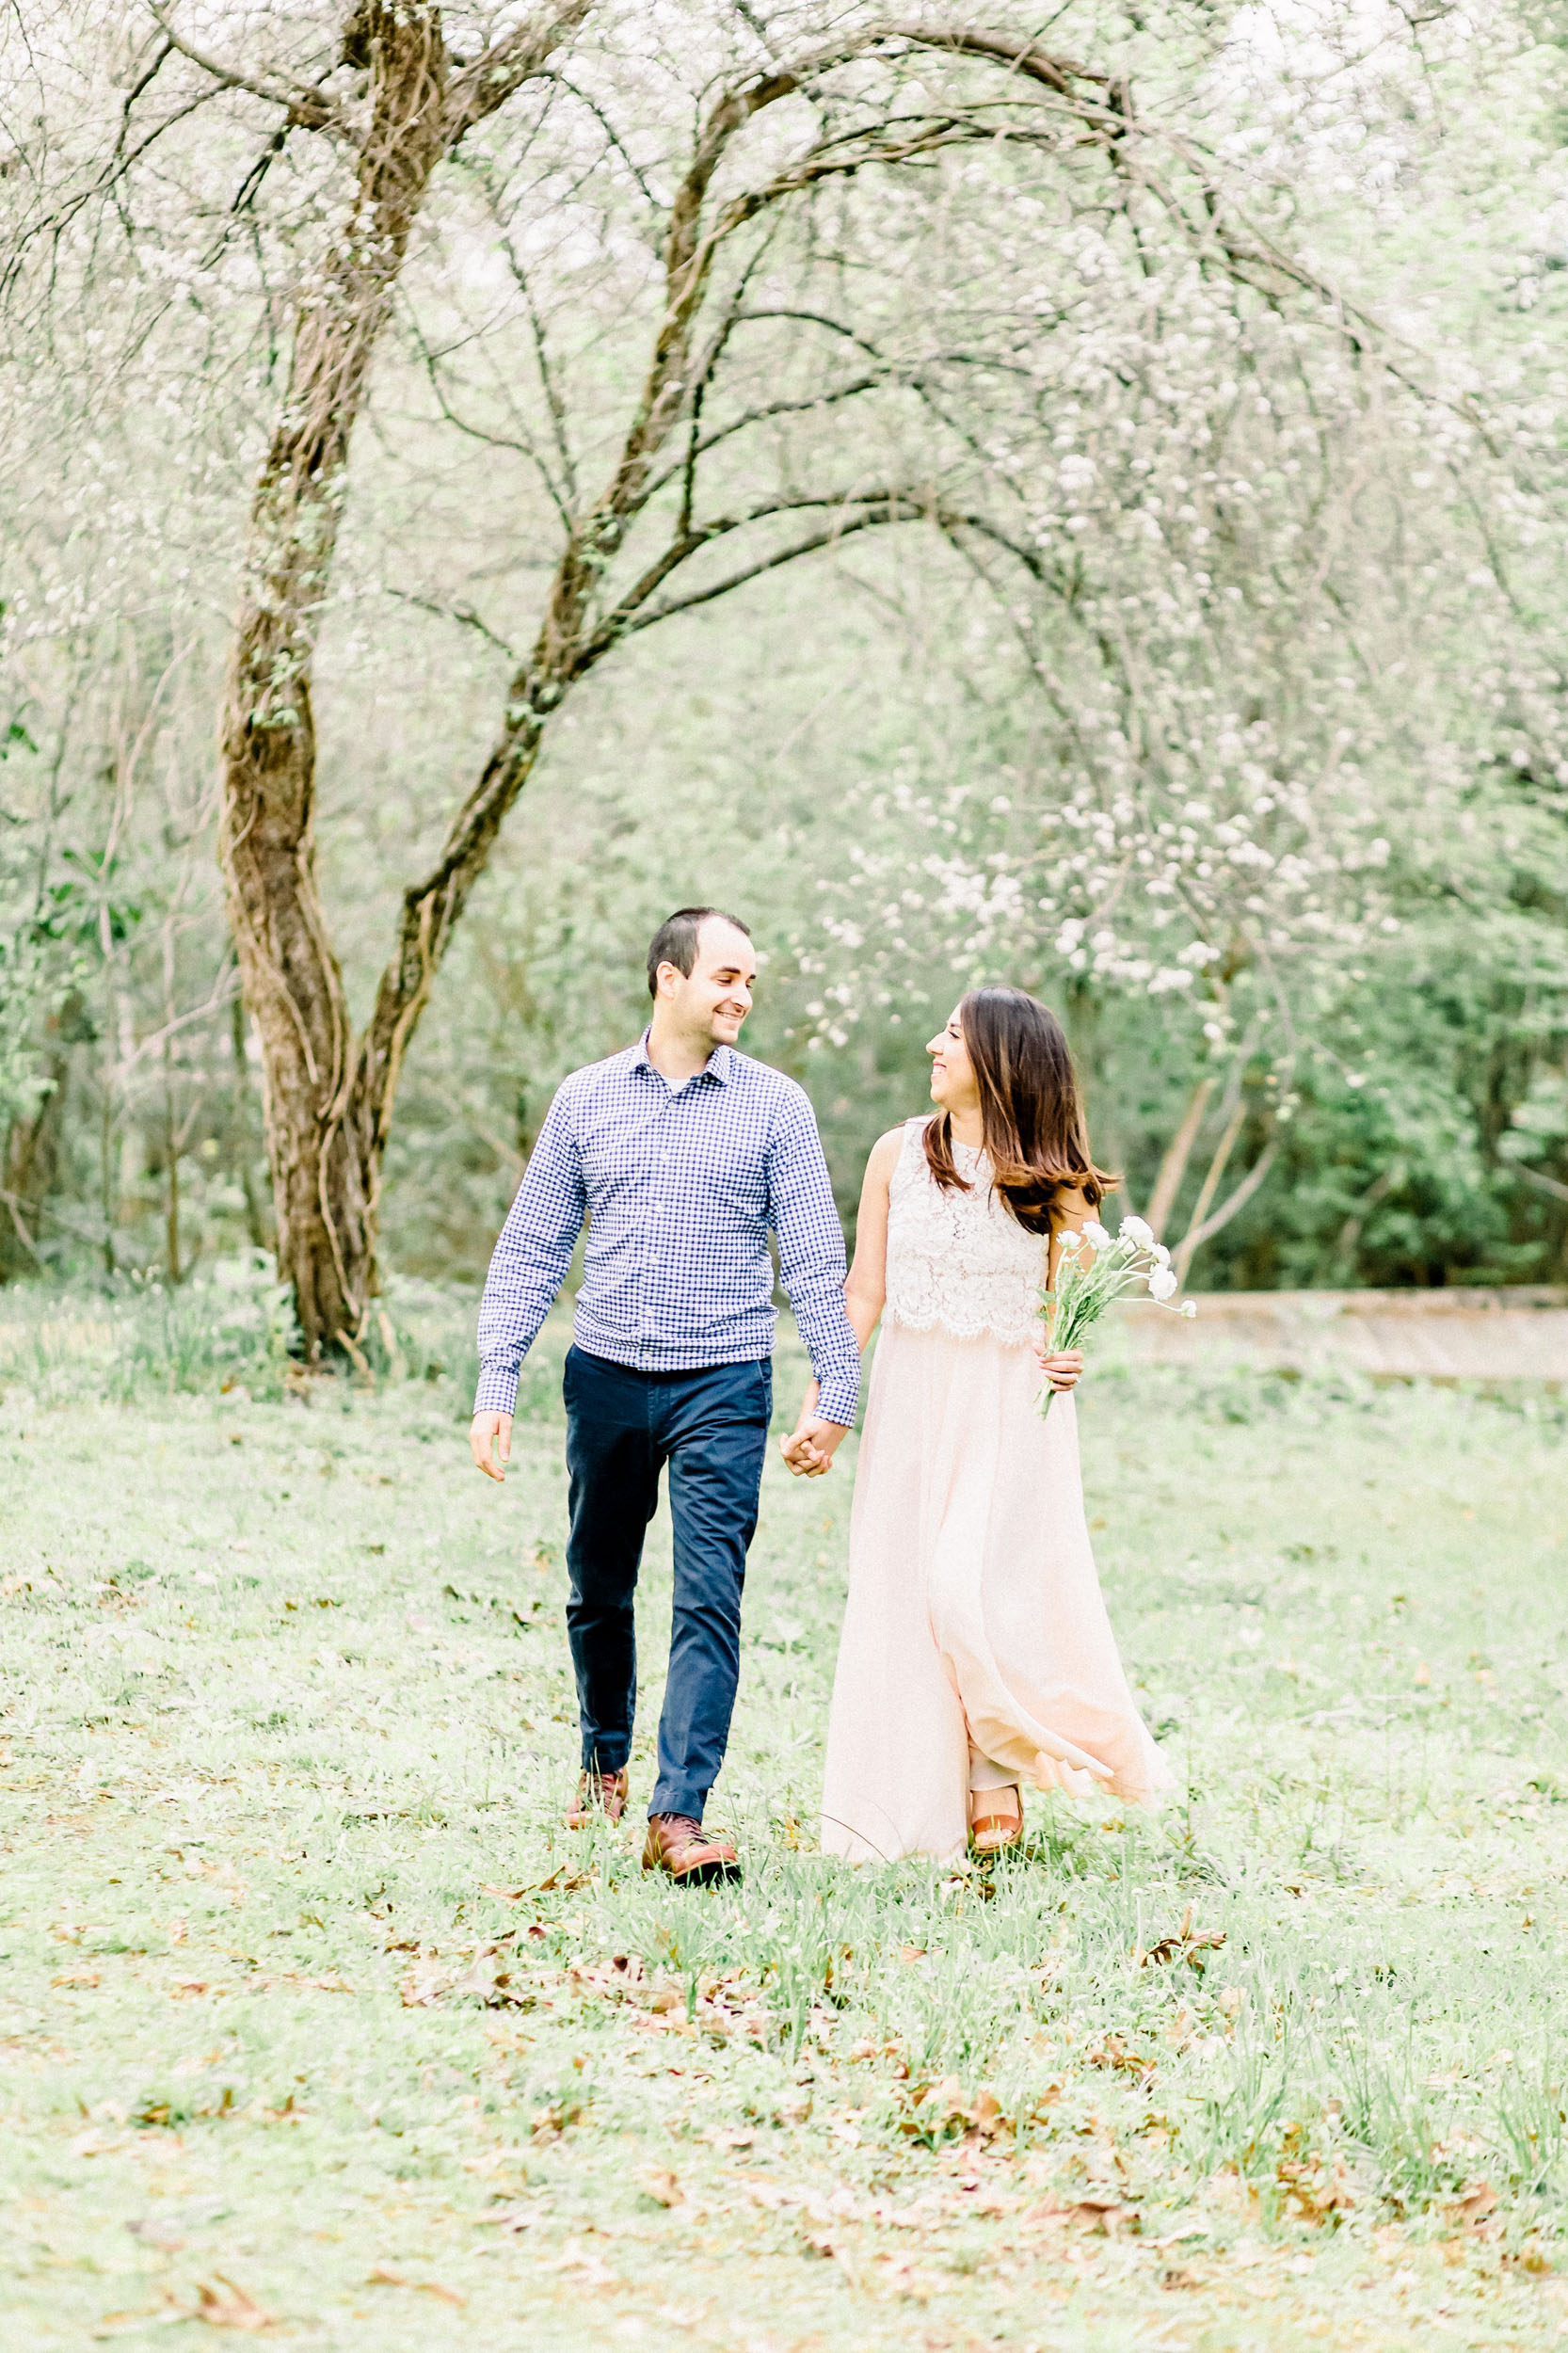 Cassie Schott Photography_Houston and Chicago Portrait Photographer_Engagement Sessions and Anniversary Sessions_45.jpg